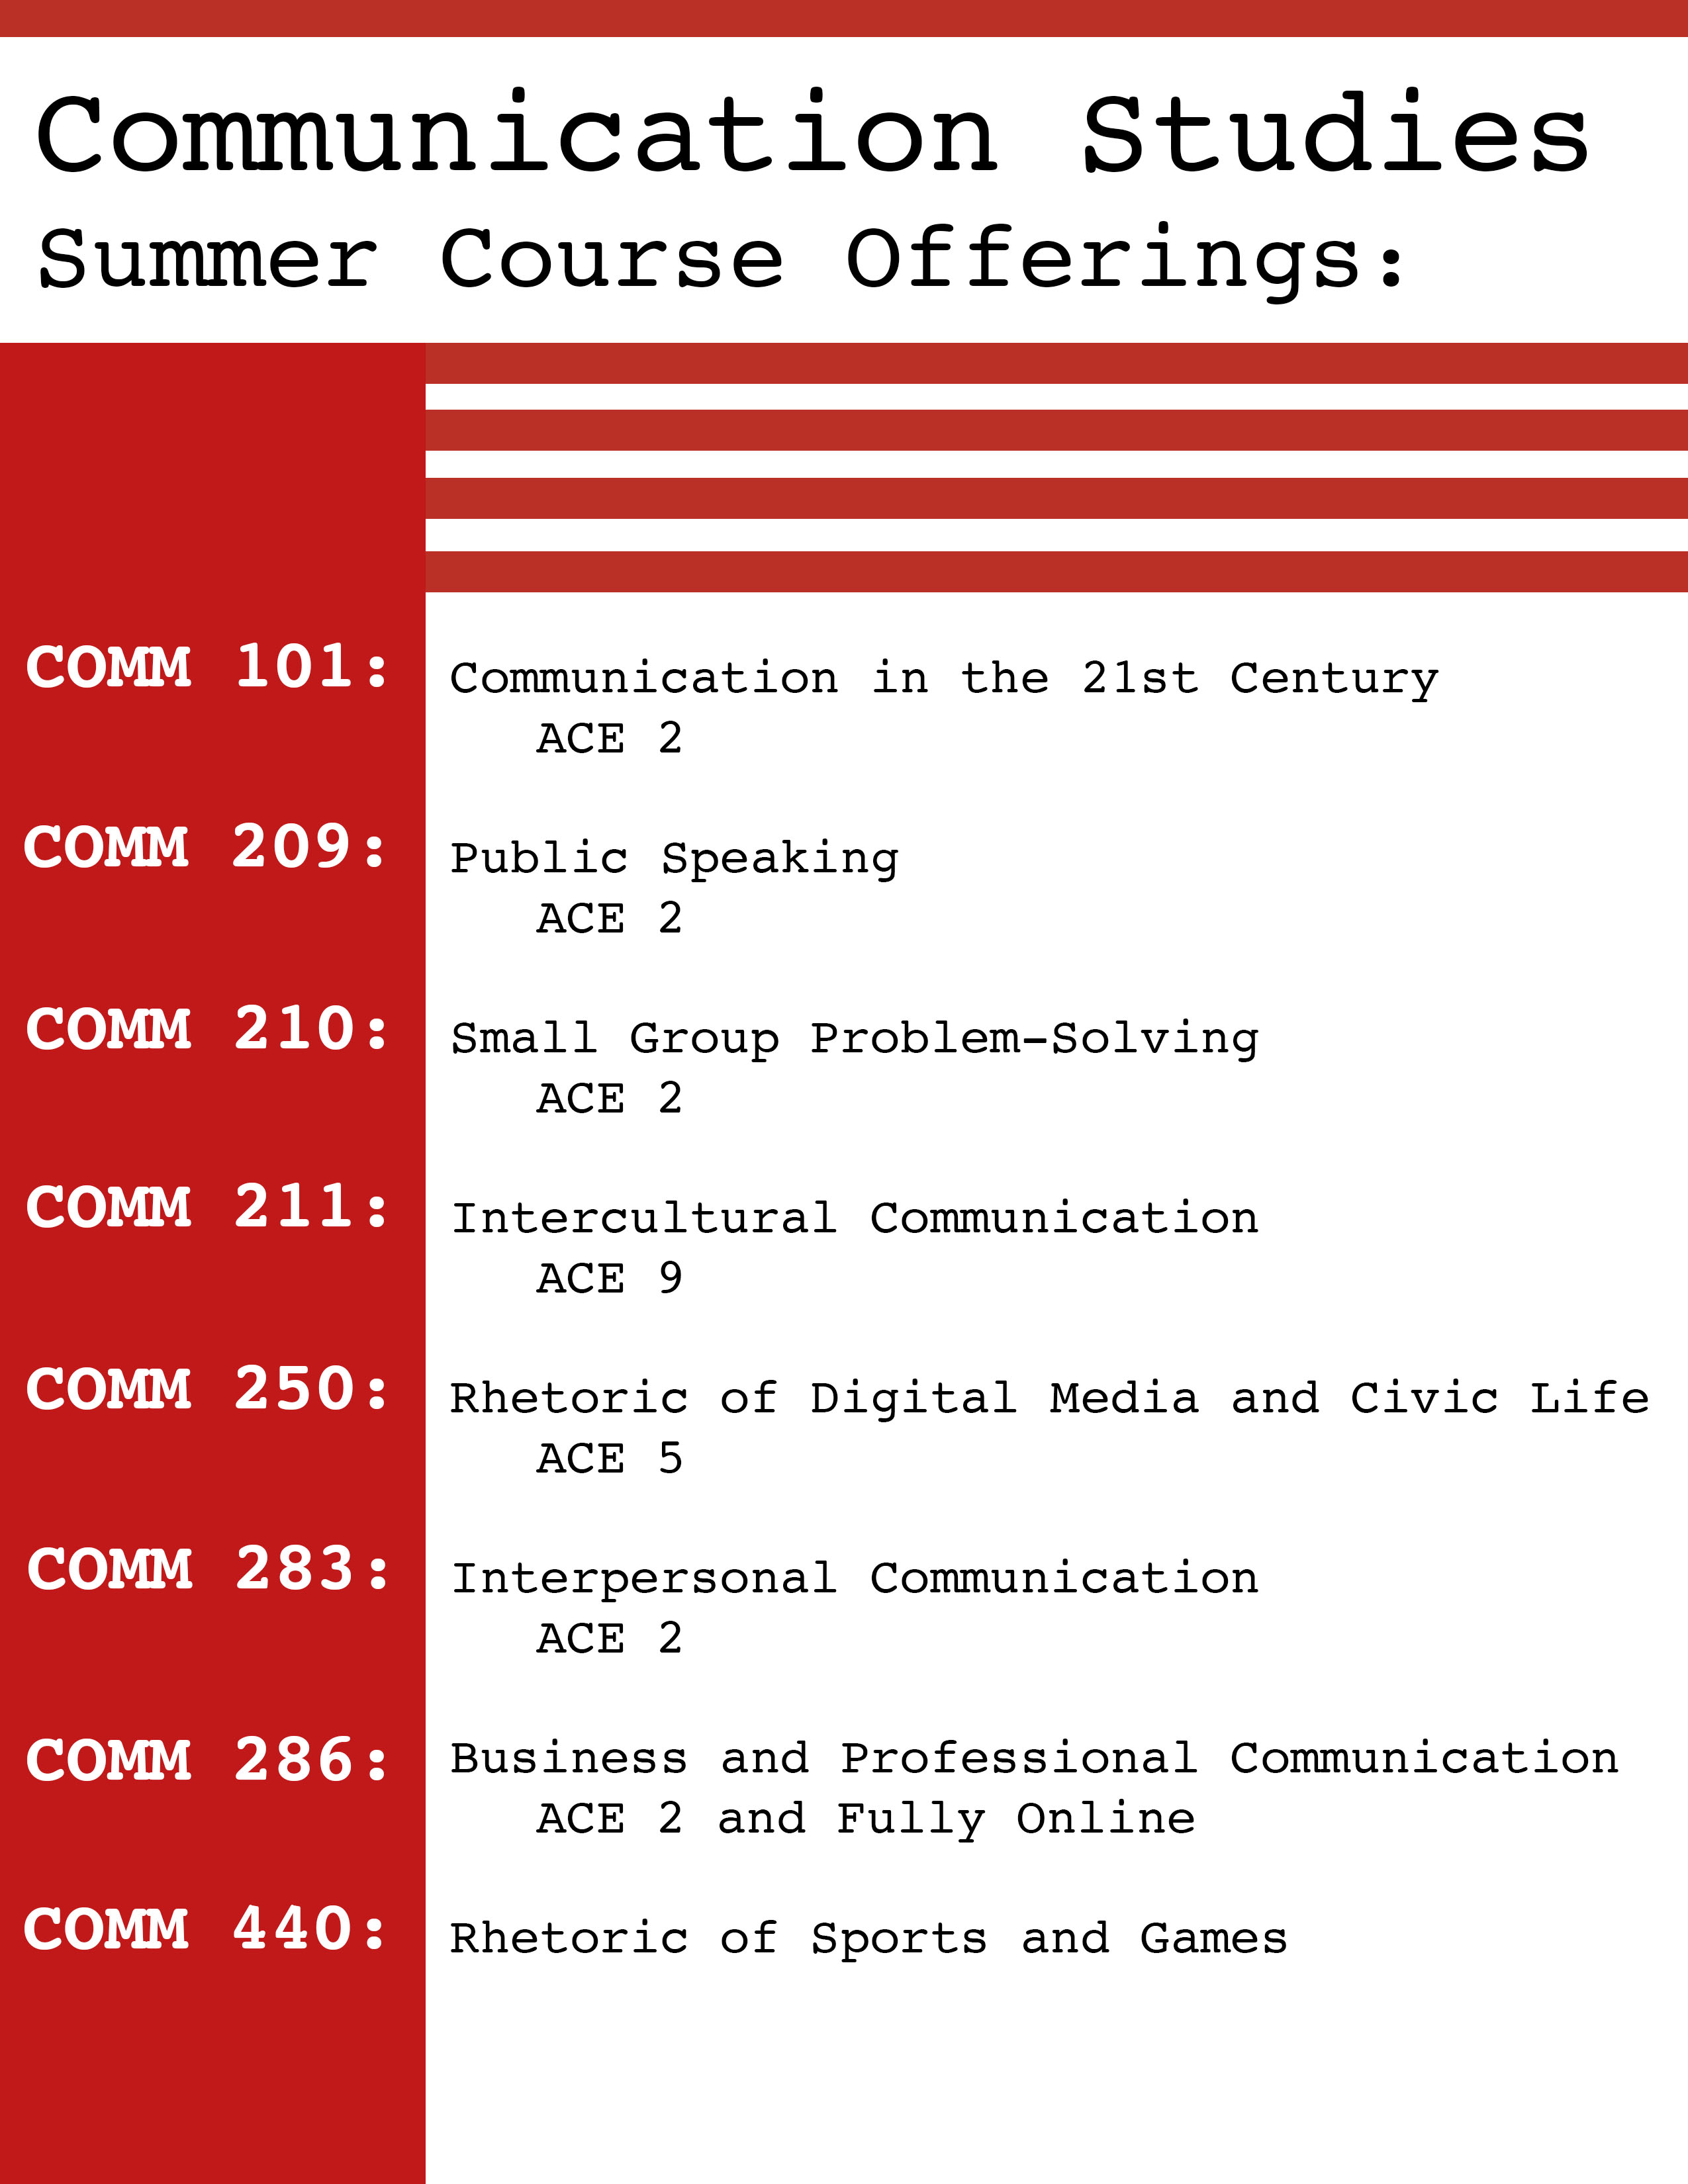 Communication Studies Course Offerings